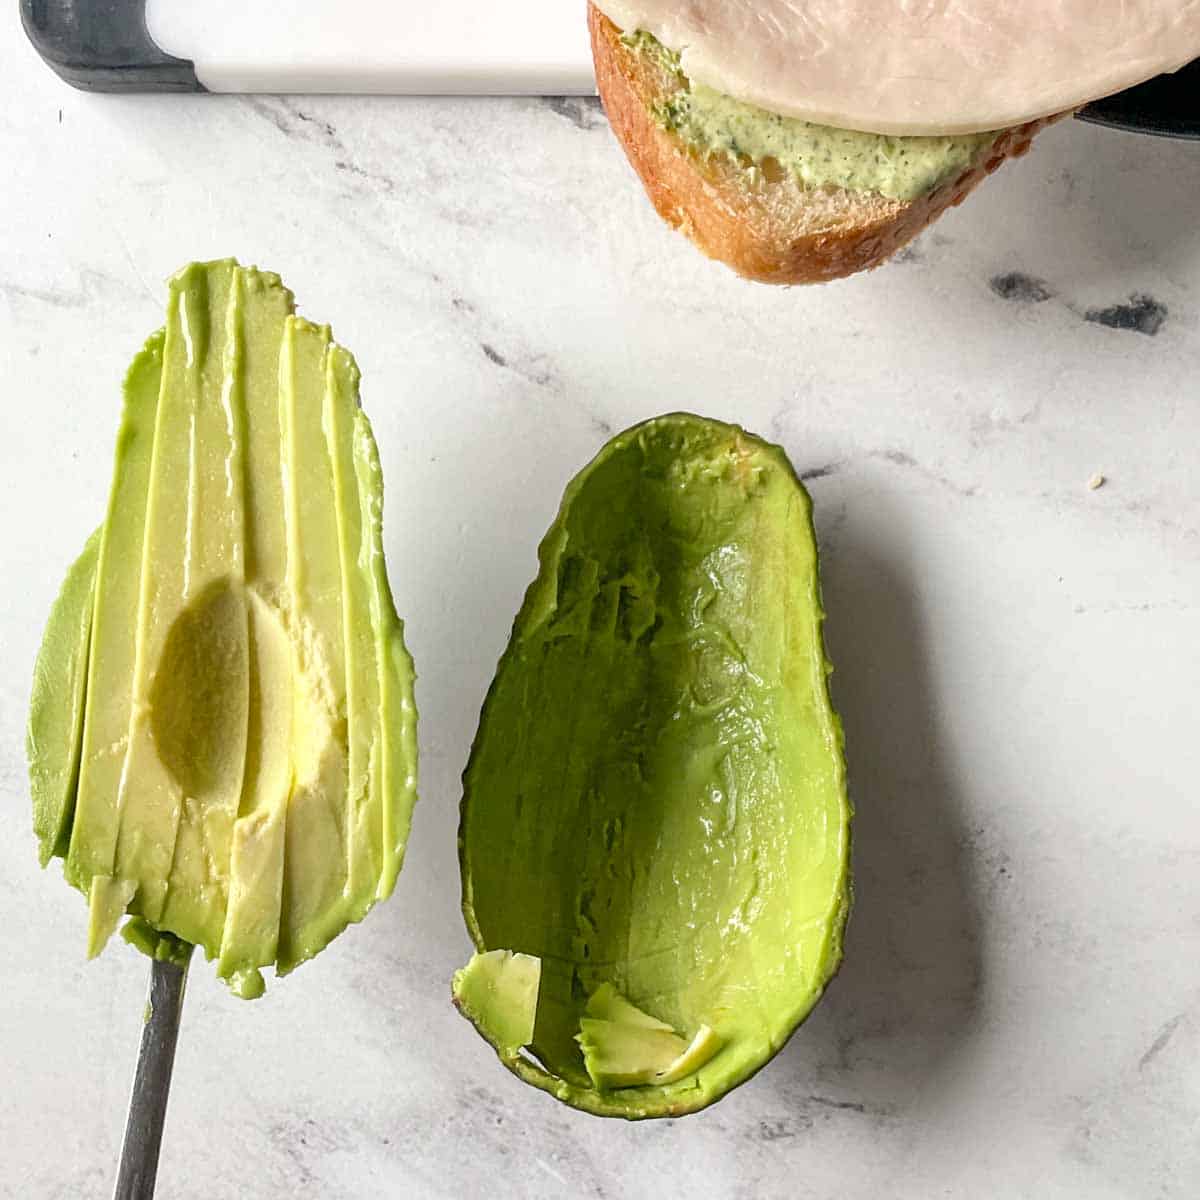 Thin slices of avocado are scooped out of their skin.